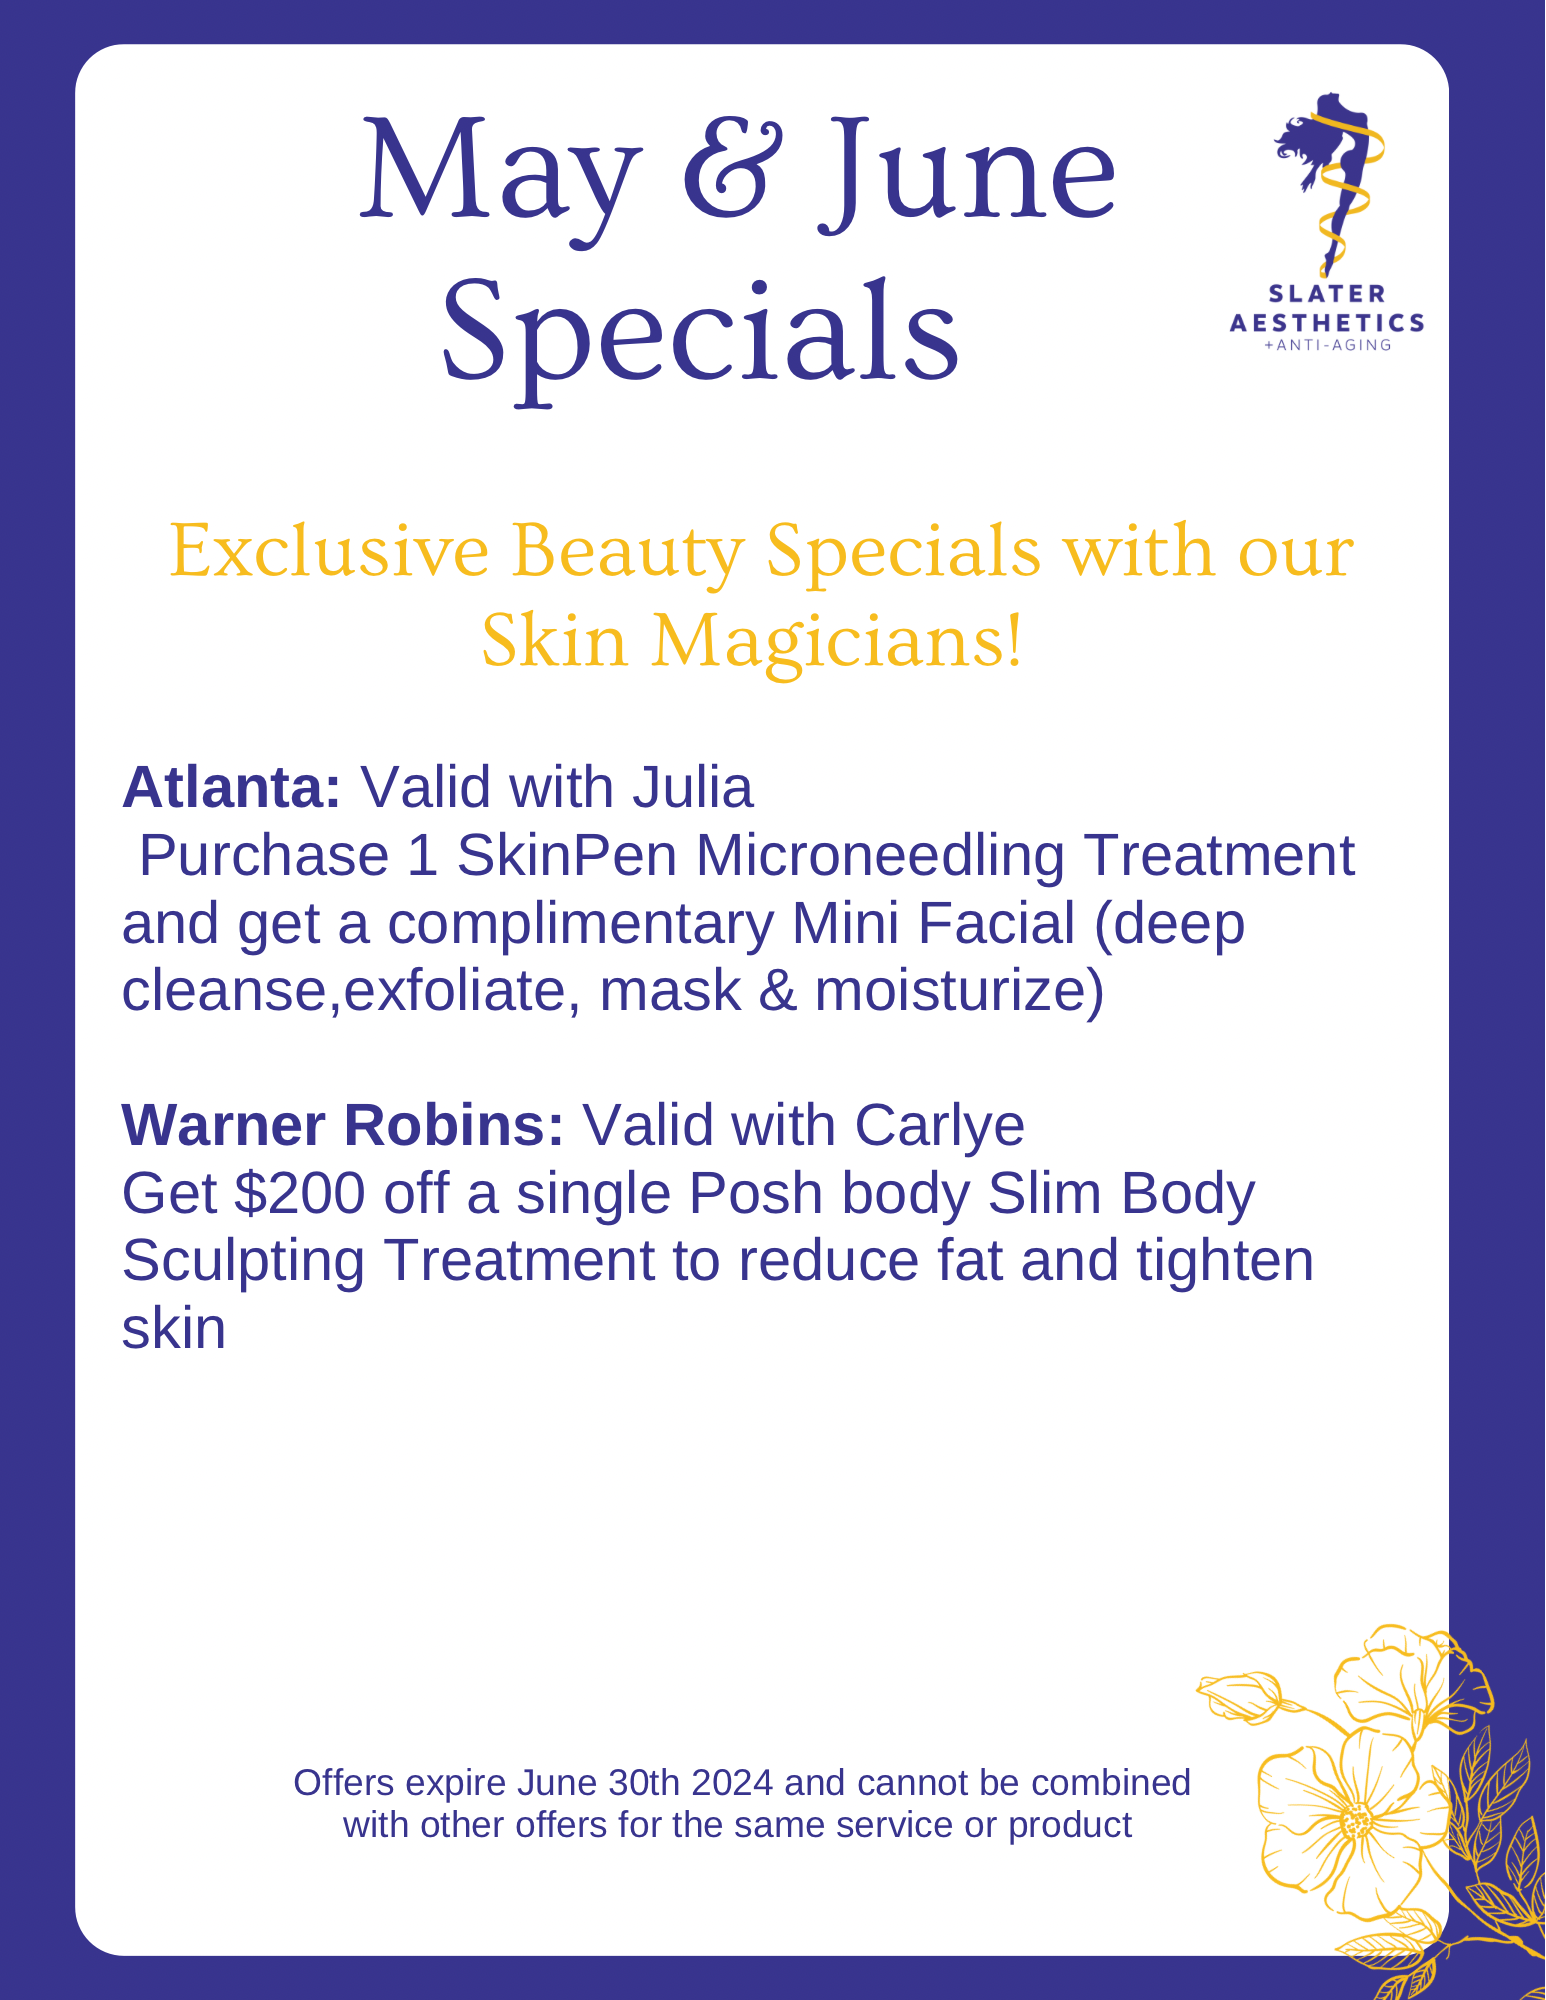 Exclusive beauty Specials with our skin magicians at Slater Aesthetics